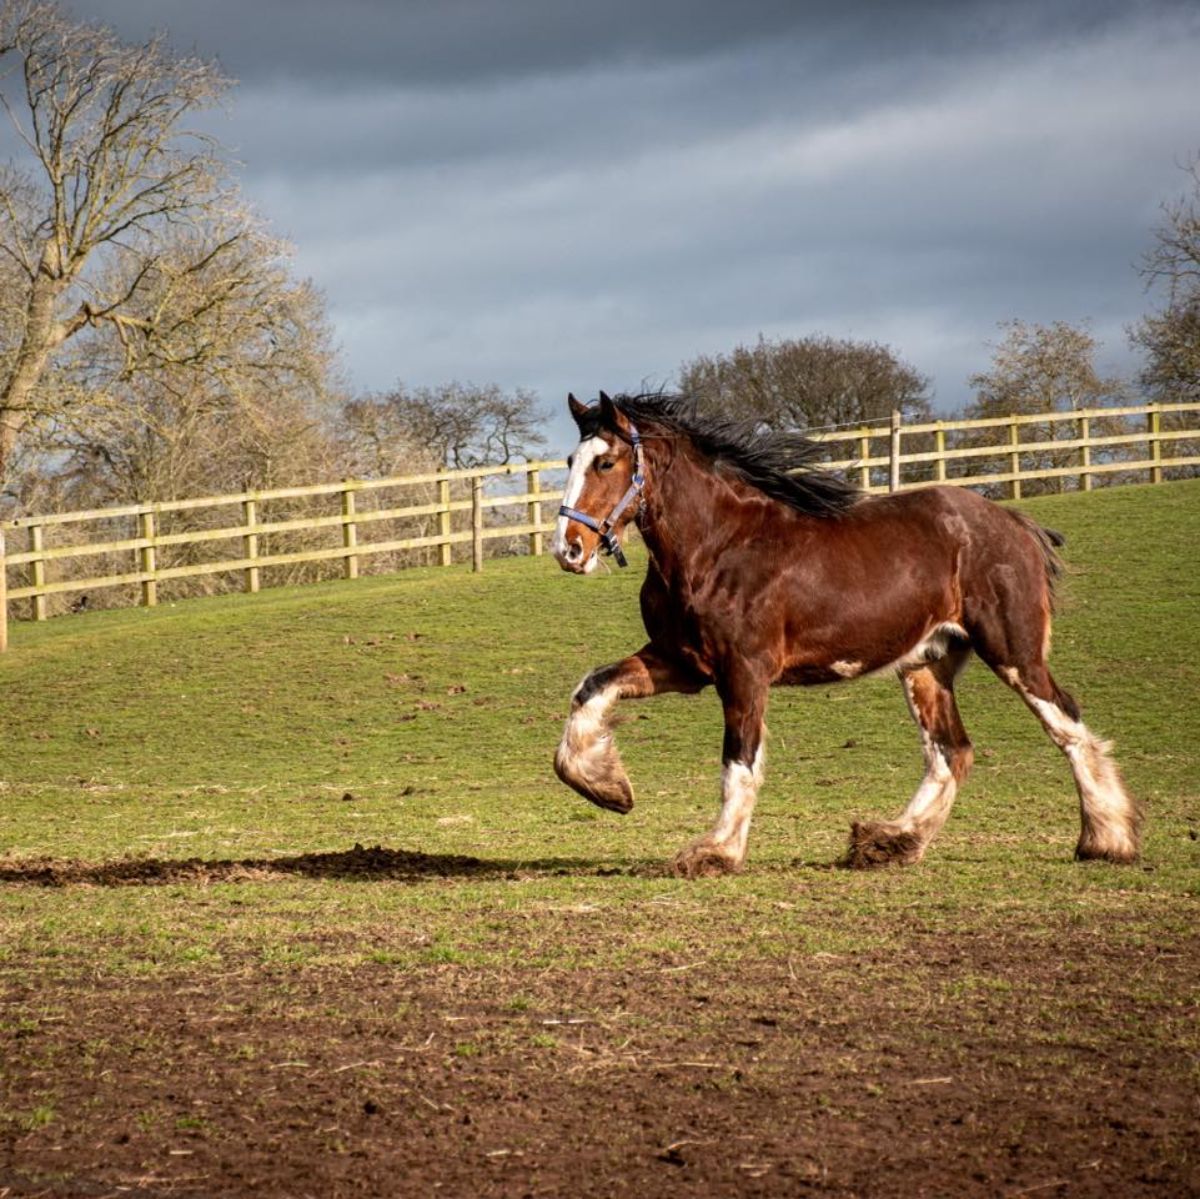 A majestic brown Shire horse runs on a ranch.